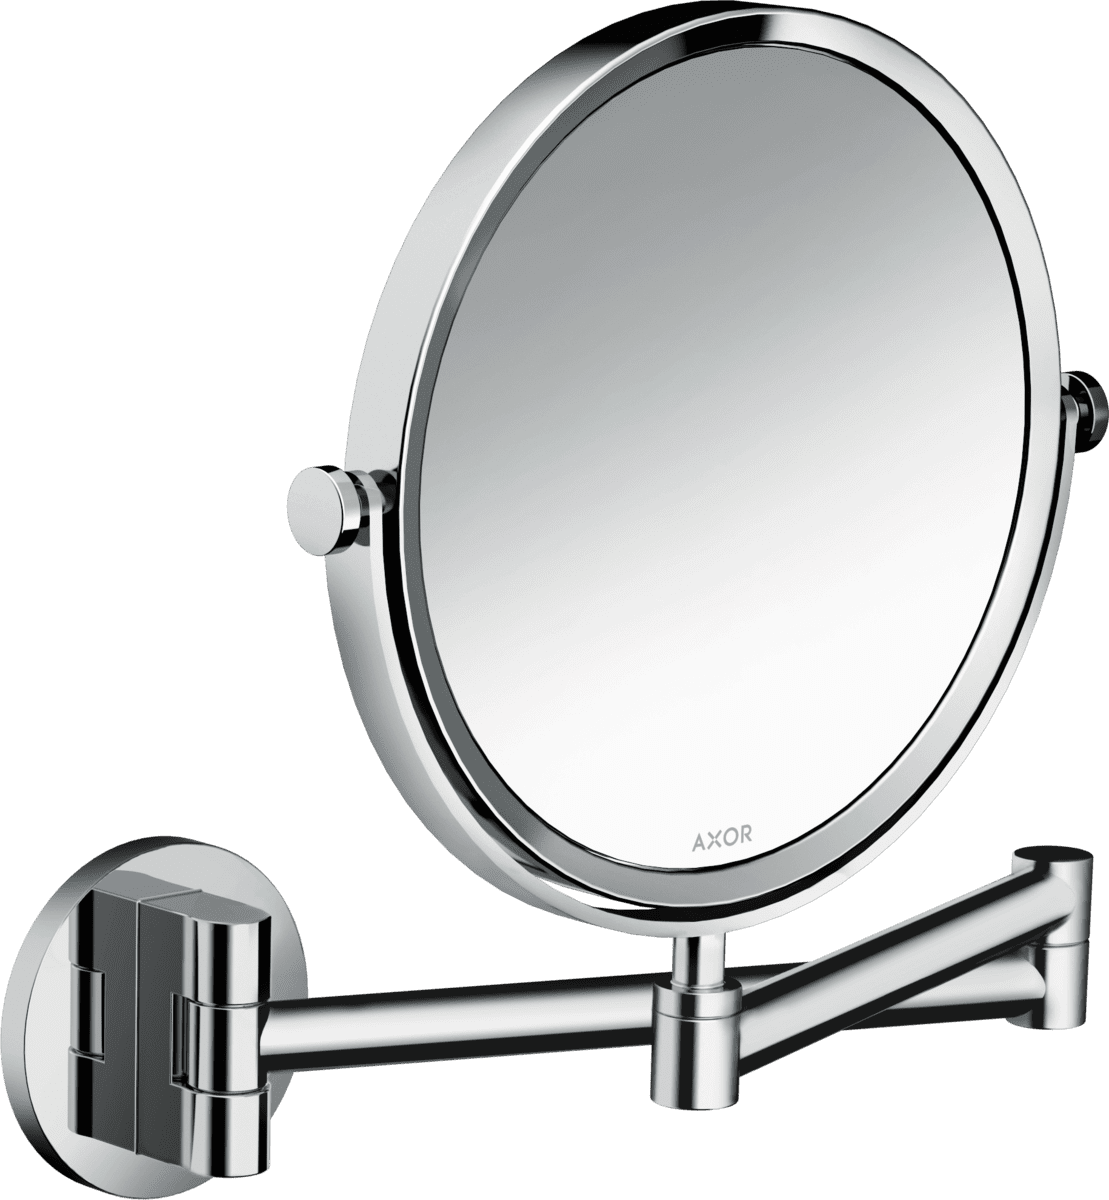 Picture of HANSGROHE AXOR Universal Circular Shaving mirror #42849000 - Chrome